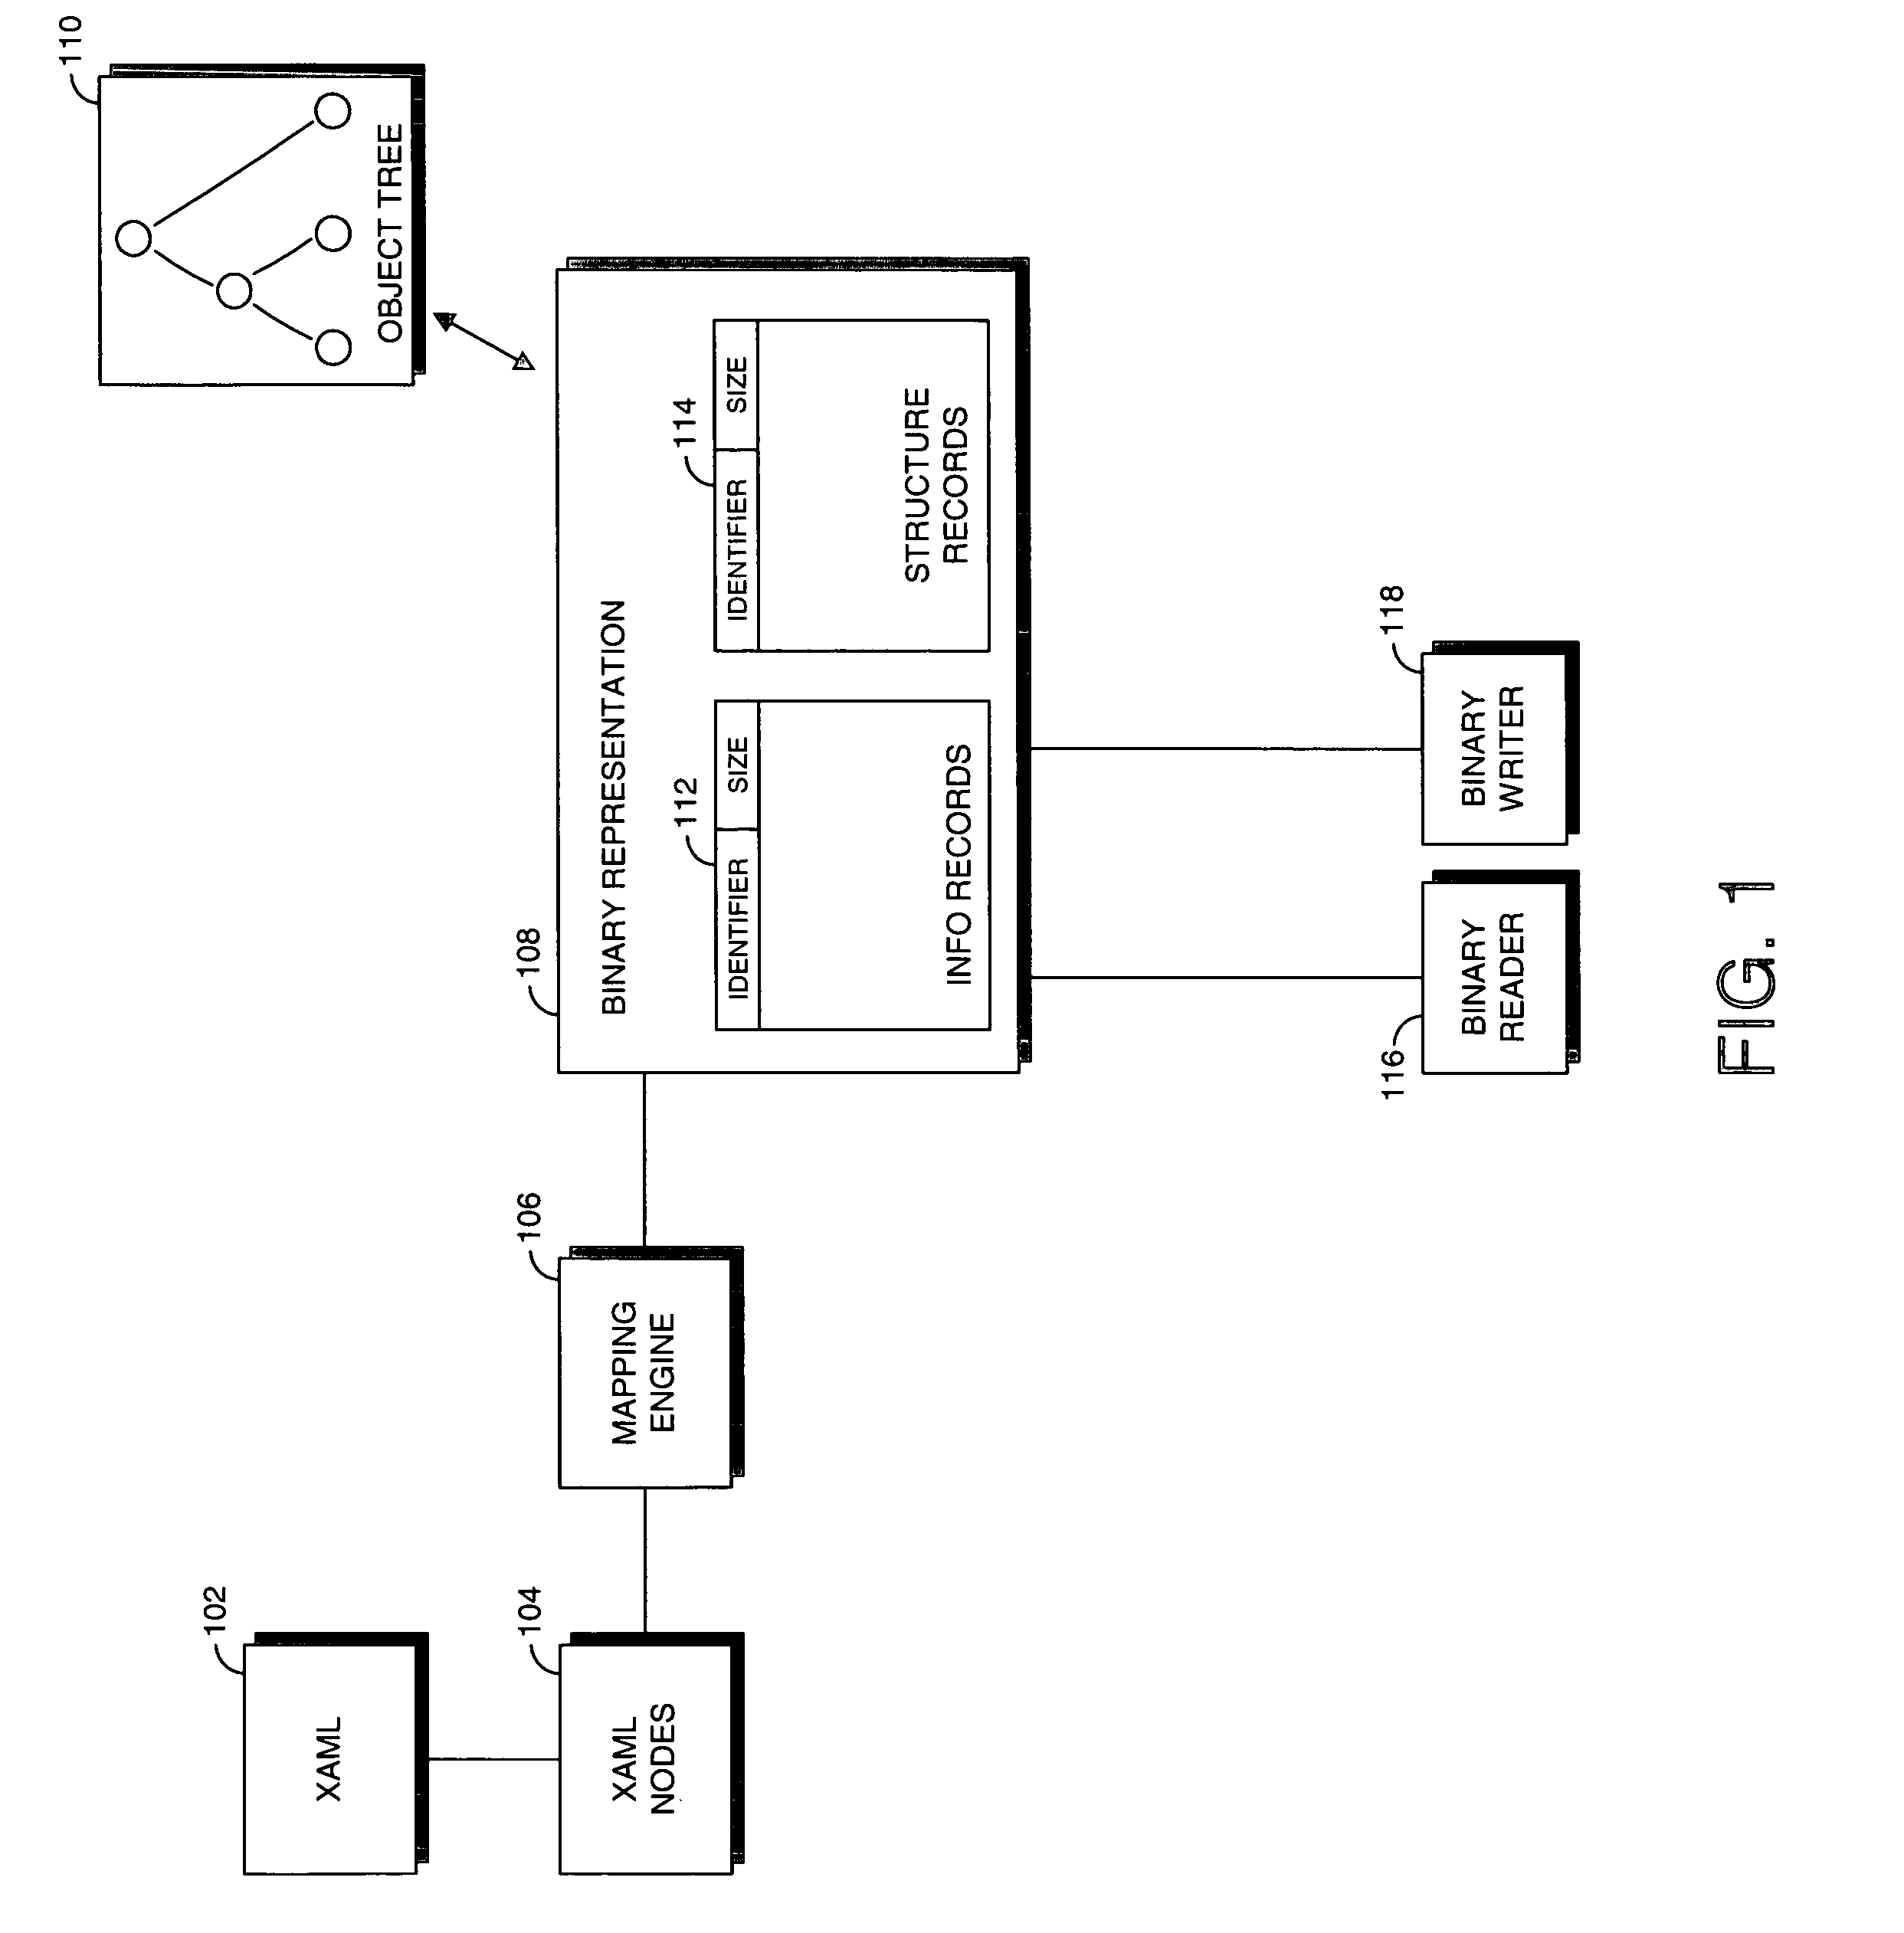 System and method for generating optimized binary representation of an object tree